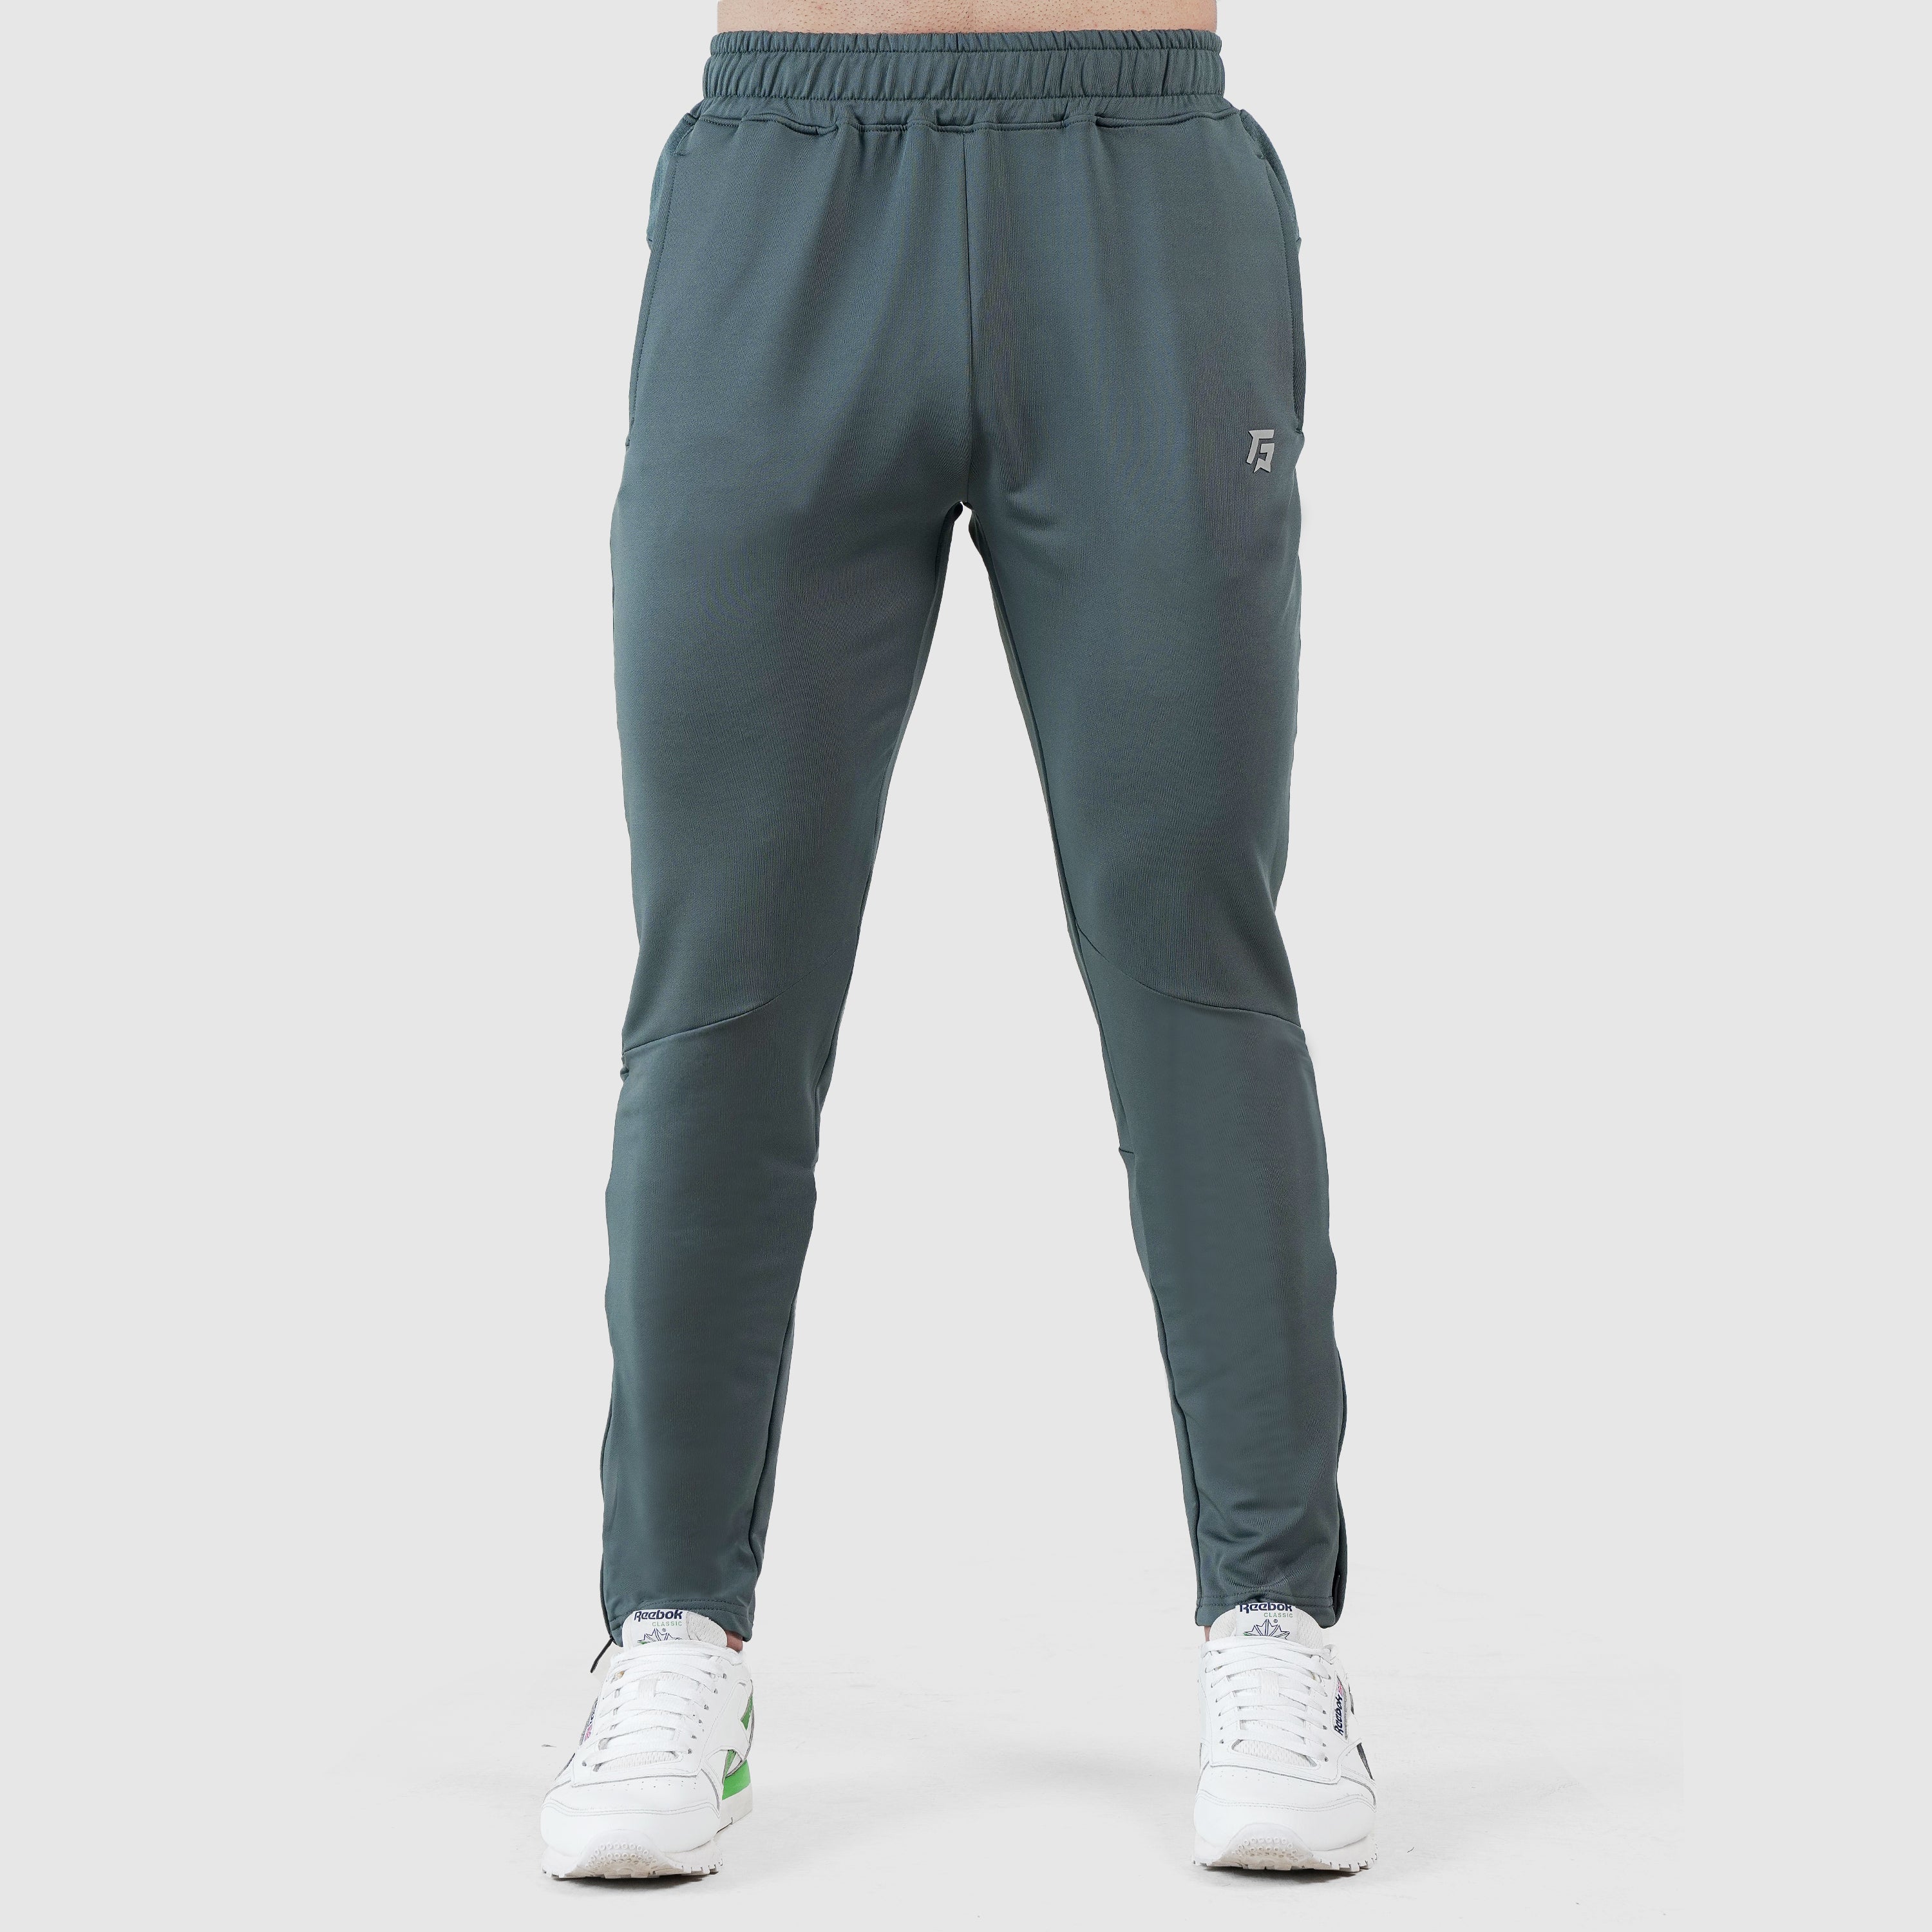 002 Pro Fit Trousers (Grey)